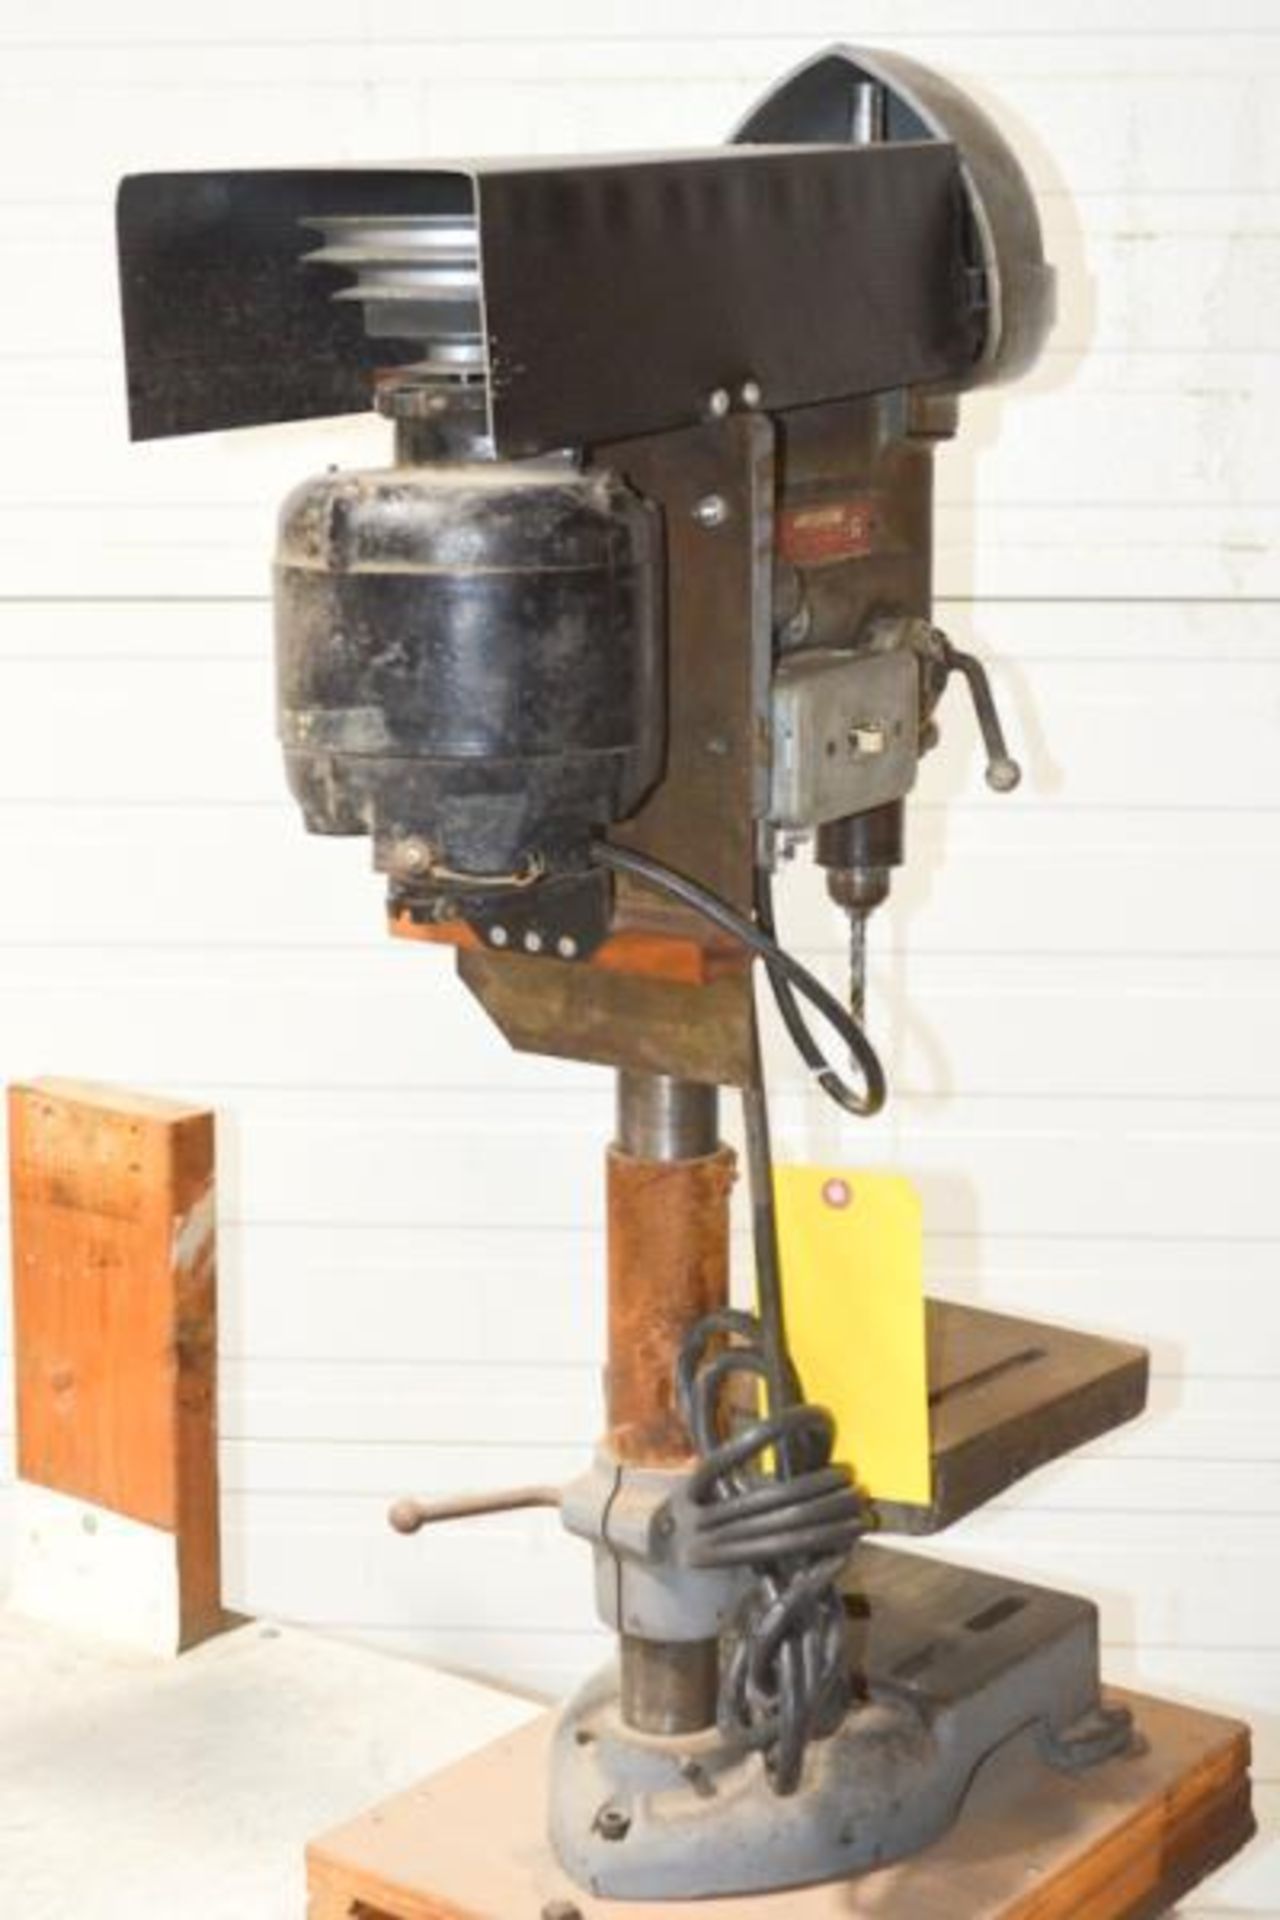 DELTA HOMECRAFT 18” BENCH-TOP DRILL PRESS, 8” X 8” TABLE SIZE, 8” LR X 6.25” FB BASE SIZE, QUILL - Image 3 of 5